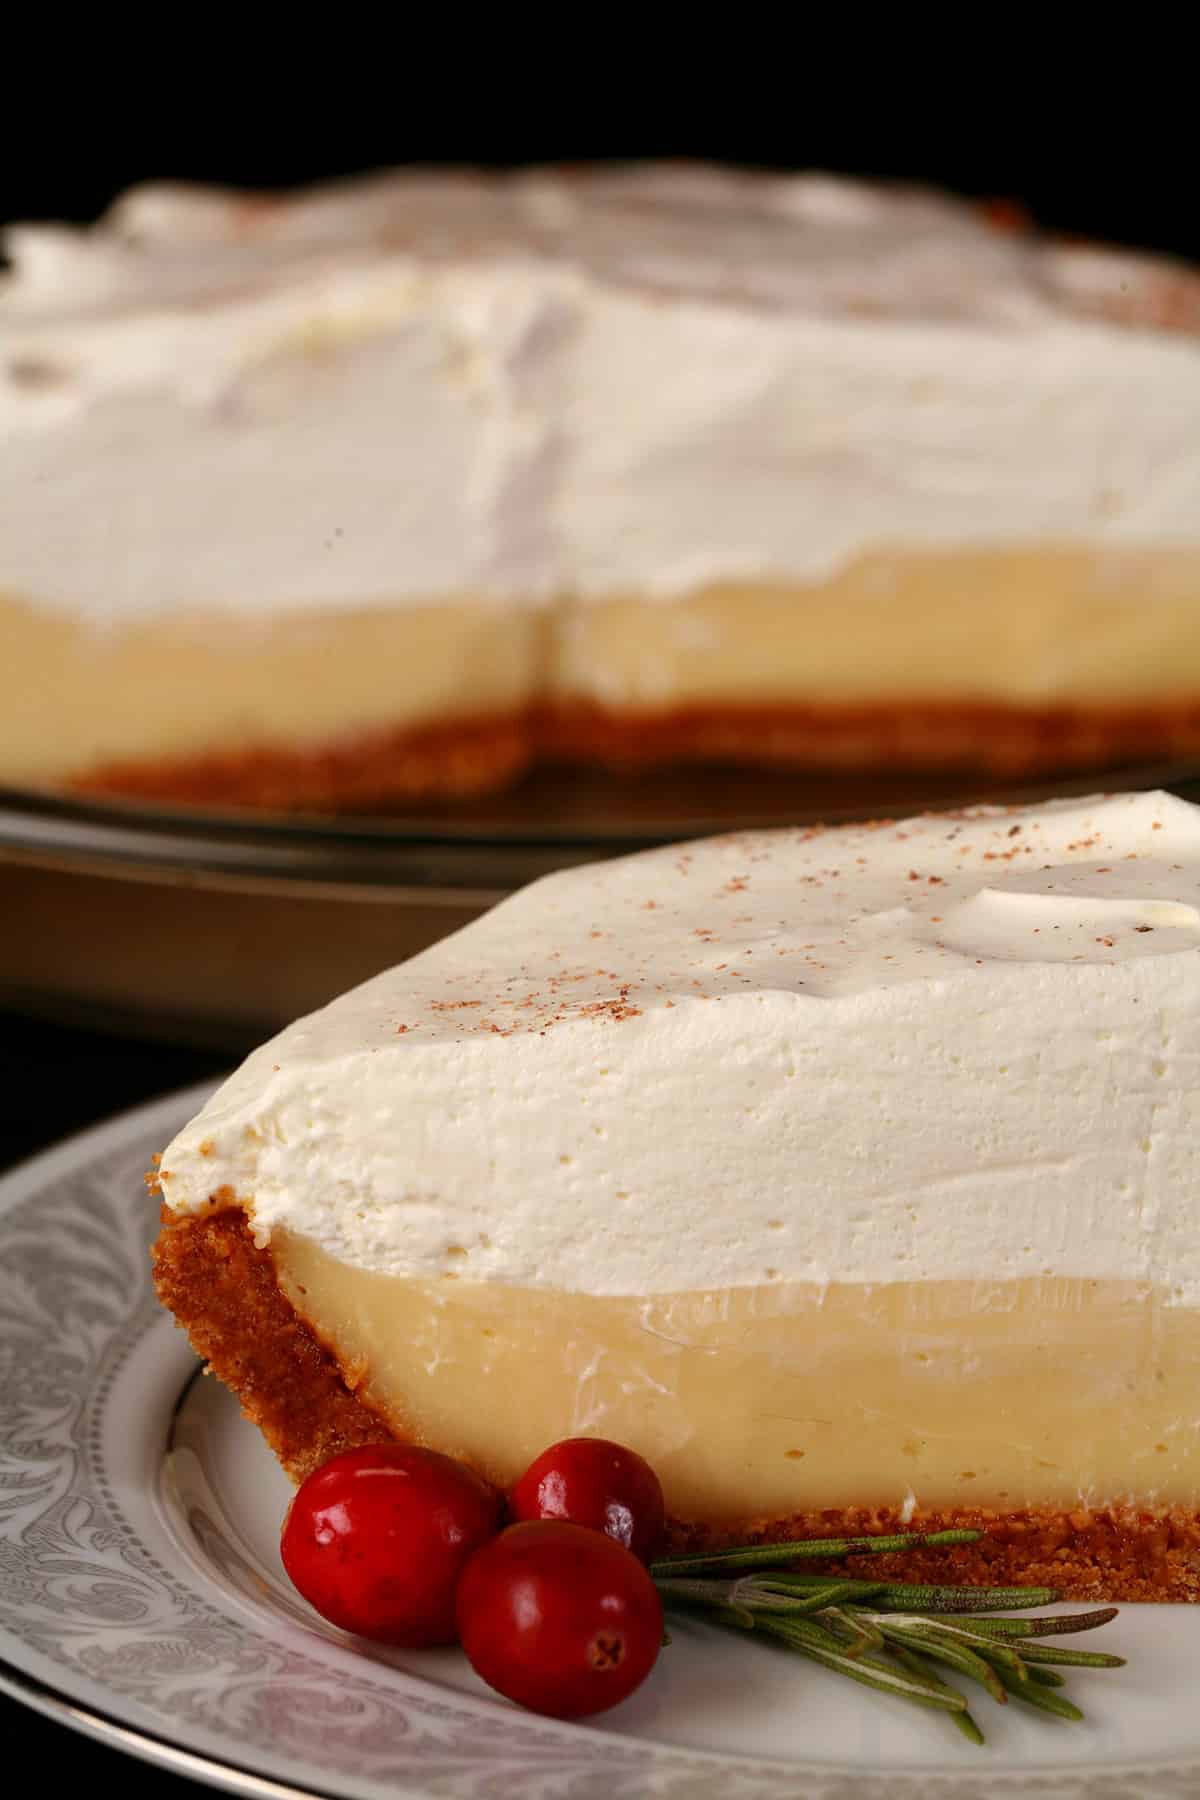 A slice of eggnog pie, with the rest of the pie behind it.